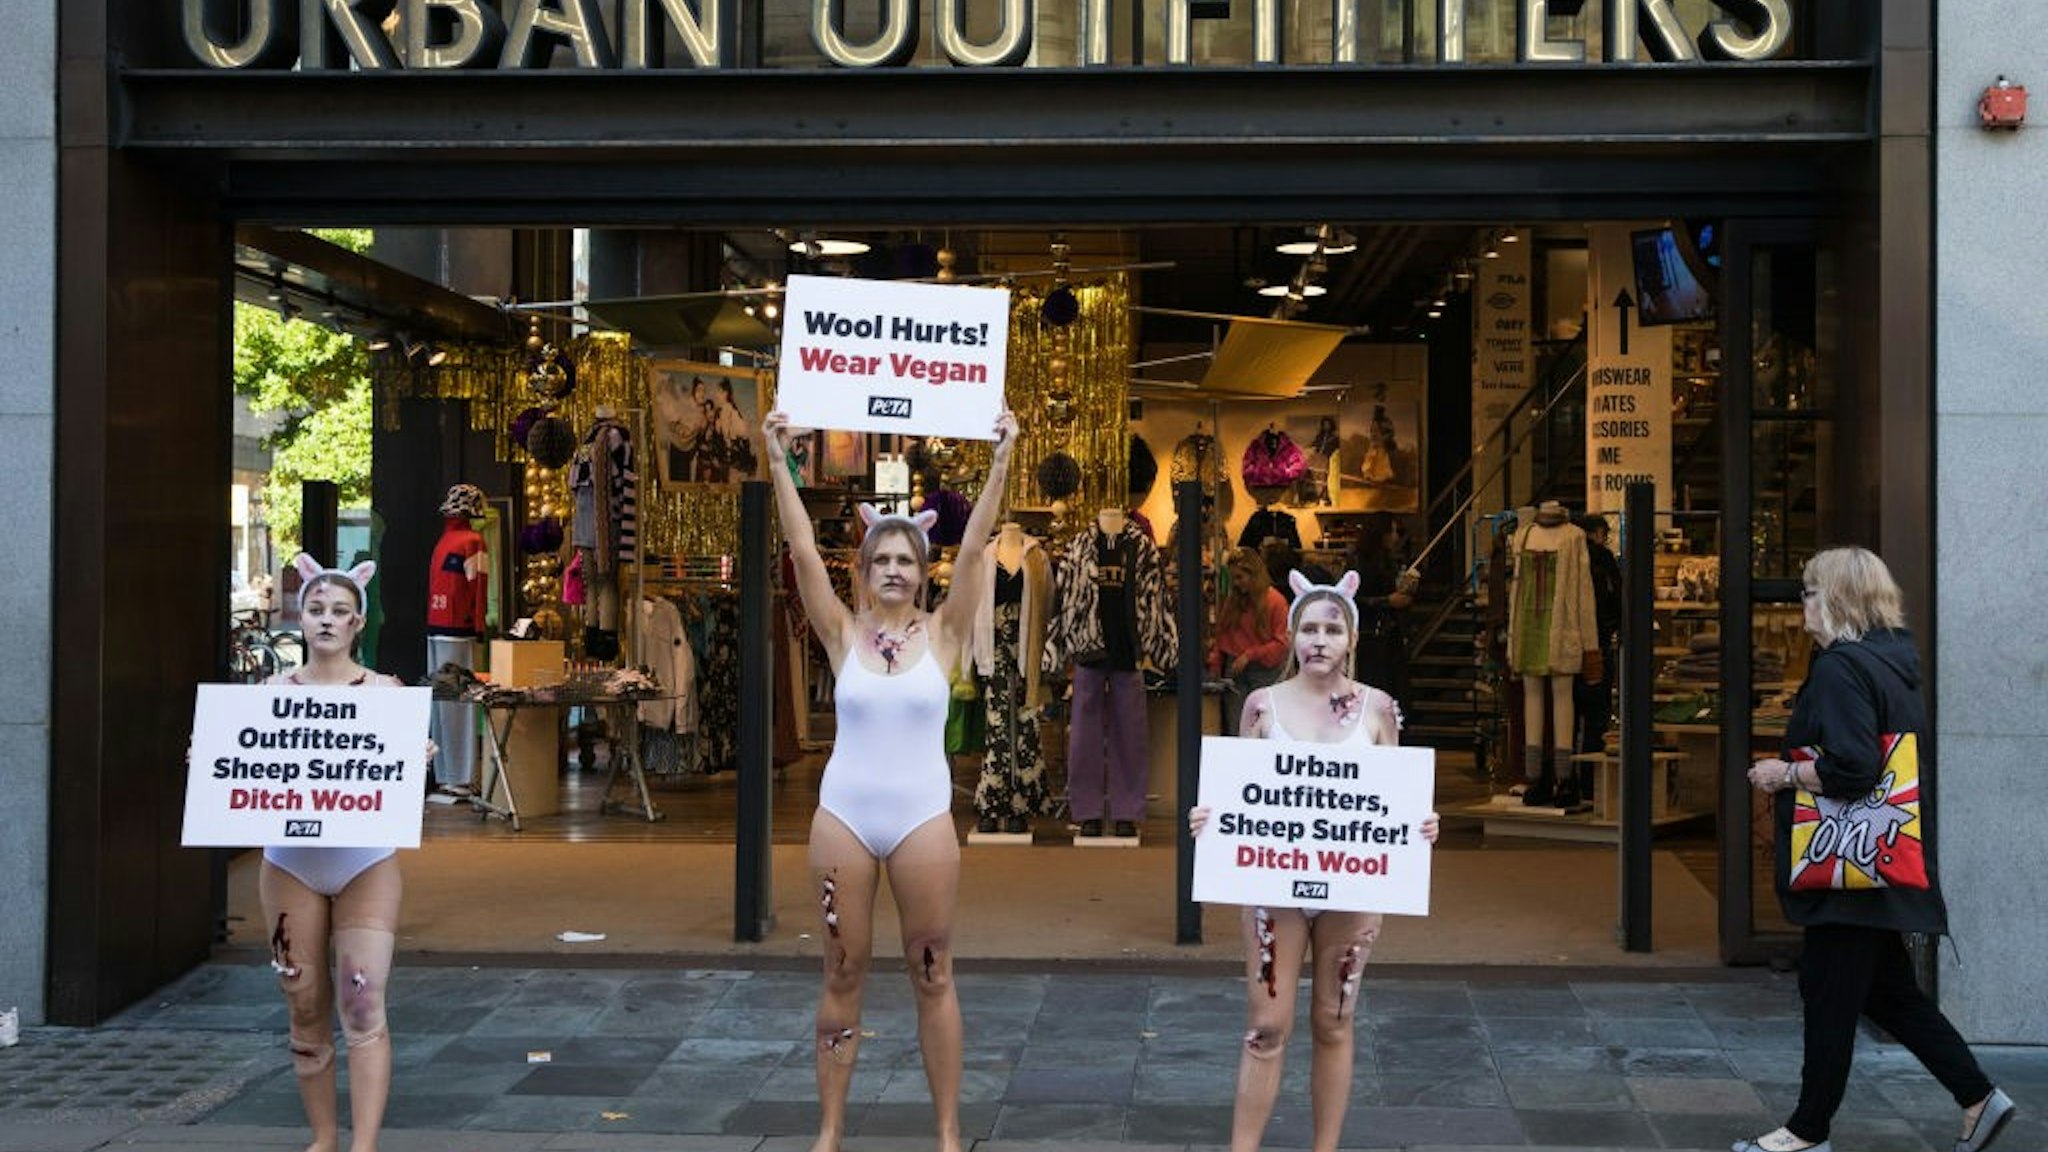 PETA supporters dressed as bloodied sheep protest outside a branch of Urban Outfitters in Oxford Street to call for an end to wool sales on 21st October 2021 in London, United Kingdom. The protest forms part of an international PETA campaign to urge Urban Outfitters Inc brands including Anthropologie and Free People to stop selling materials cruelly taken from animals. (photo by